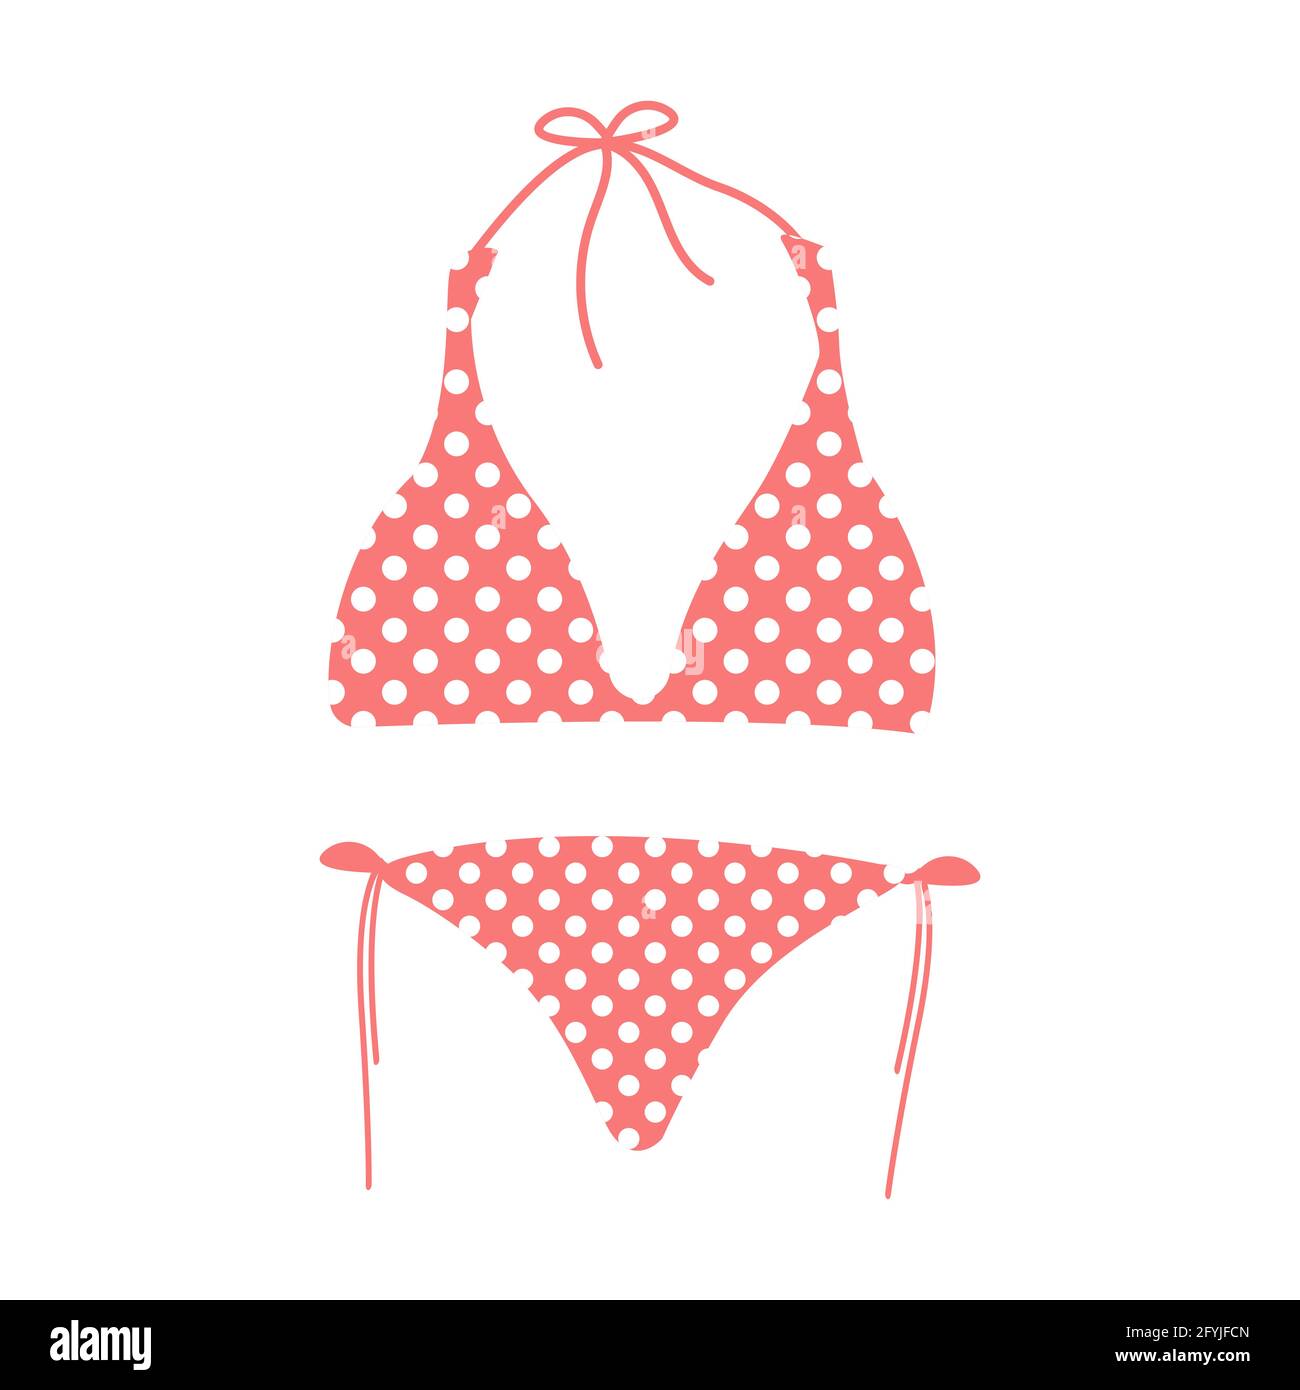 Download Suit, Bathing, Swimwear. Royalty-Free Vector Graphic - Pixabay